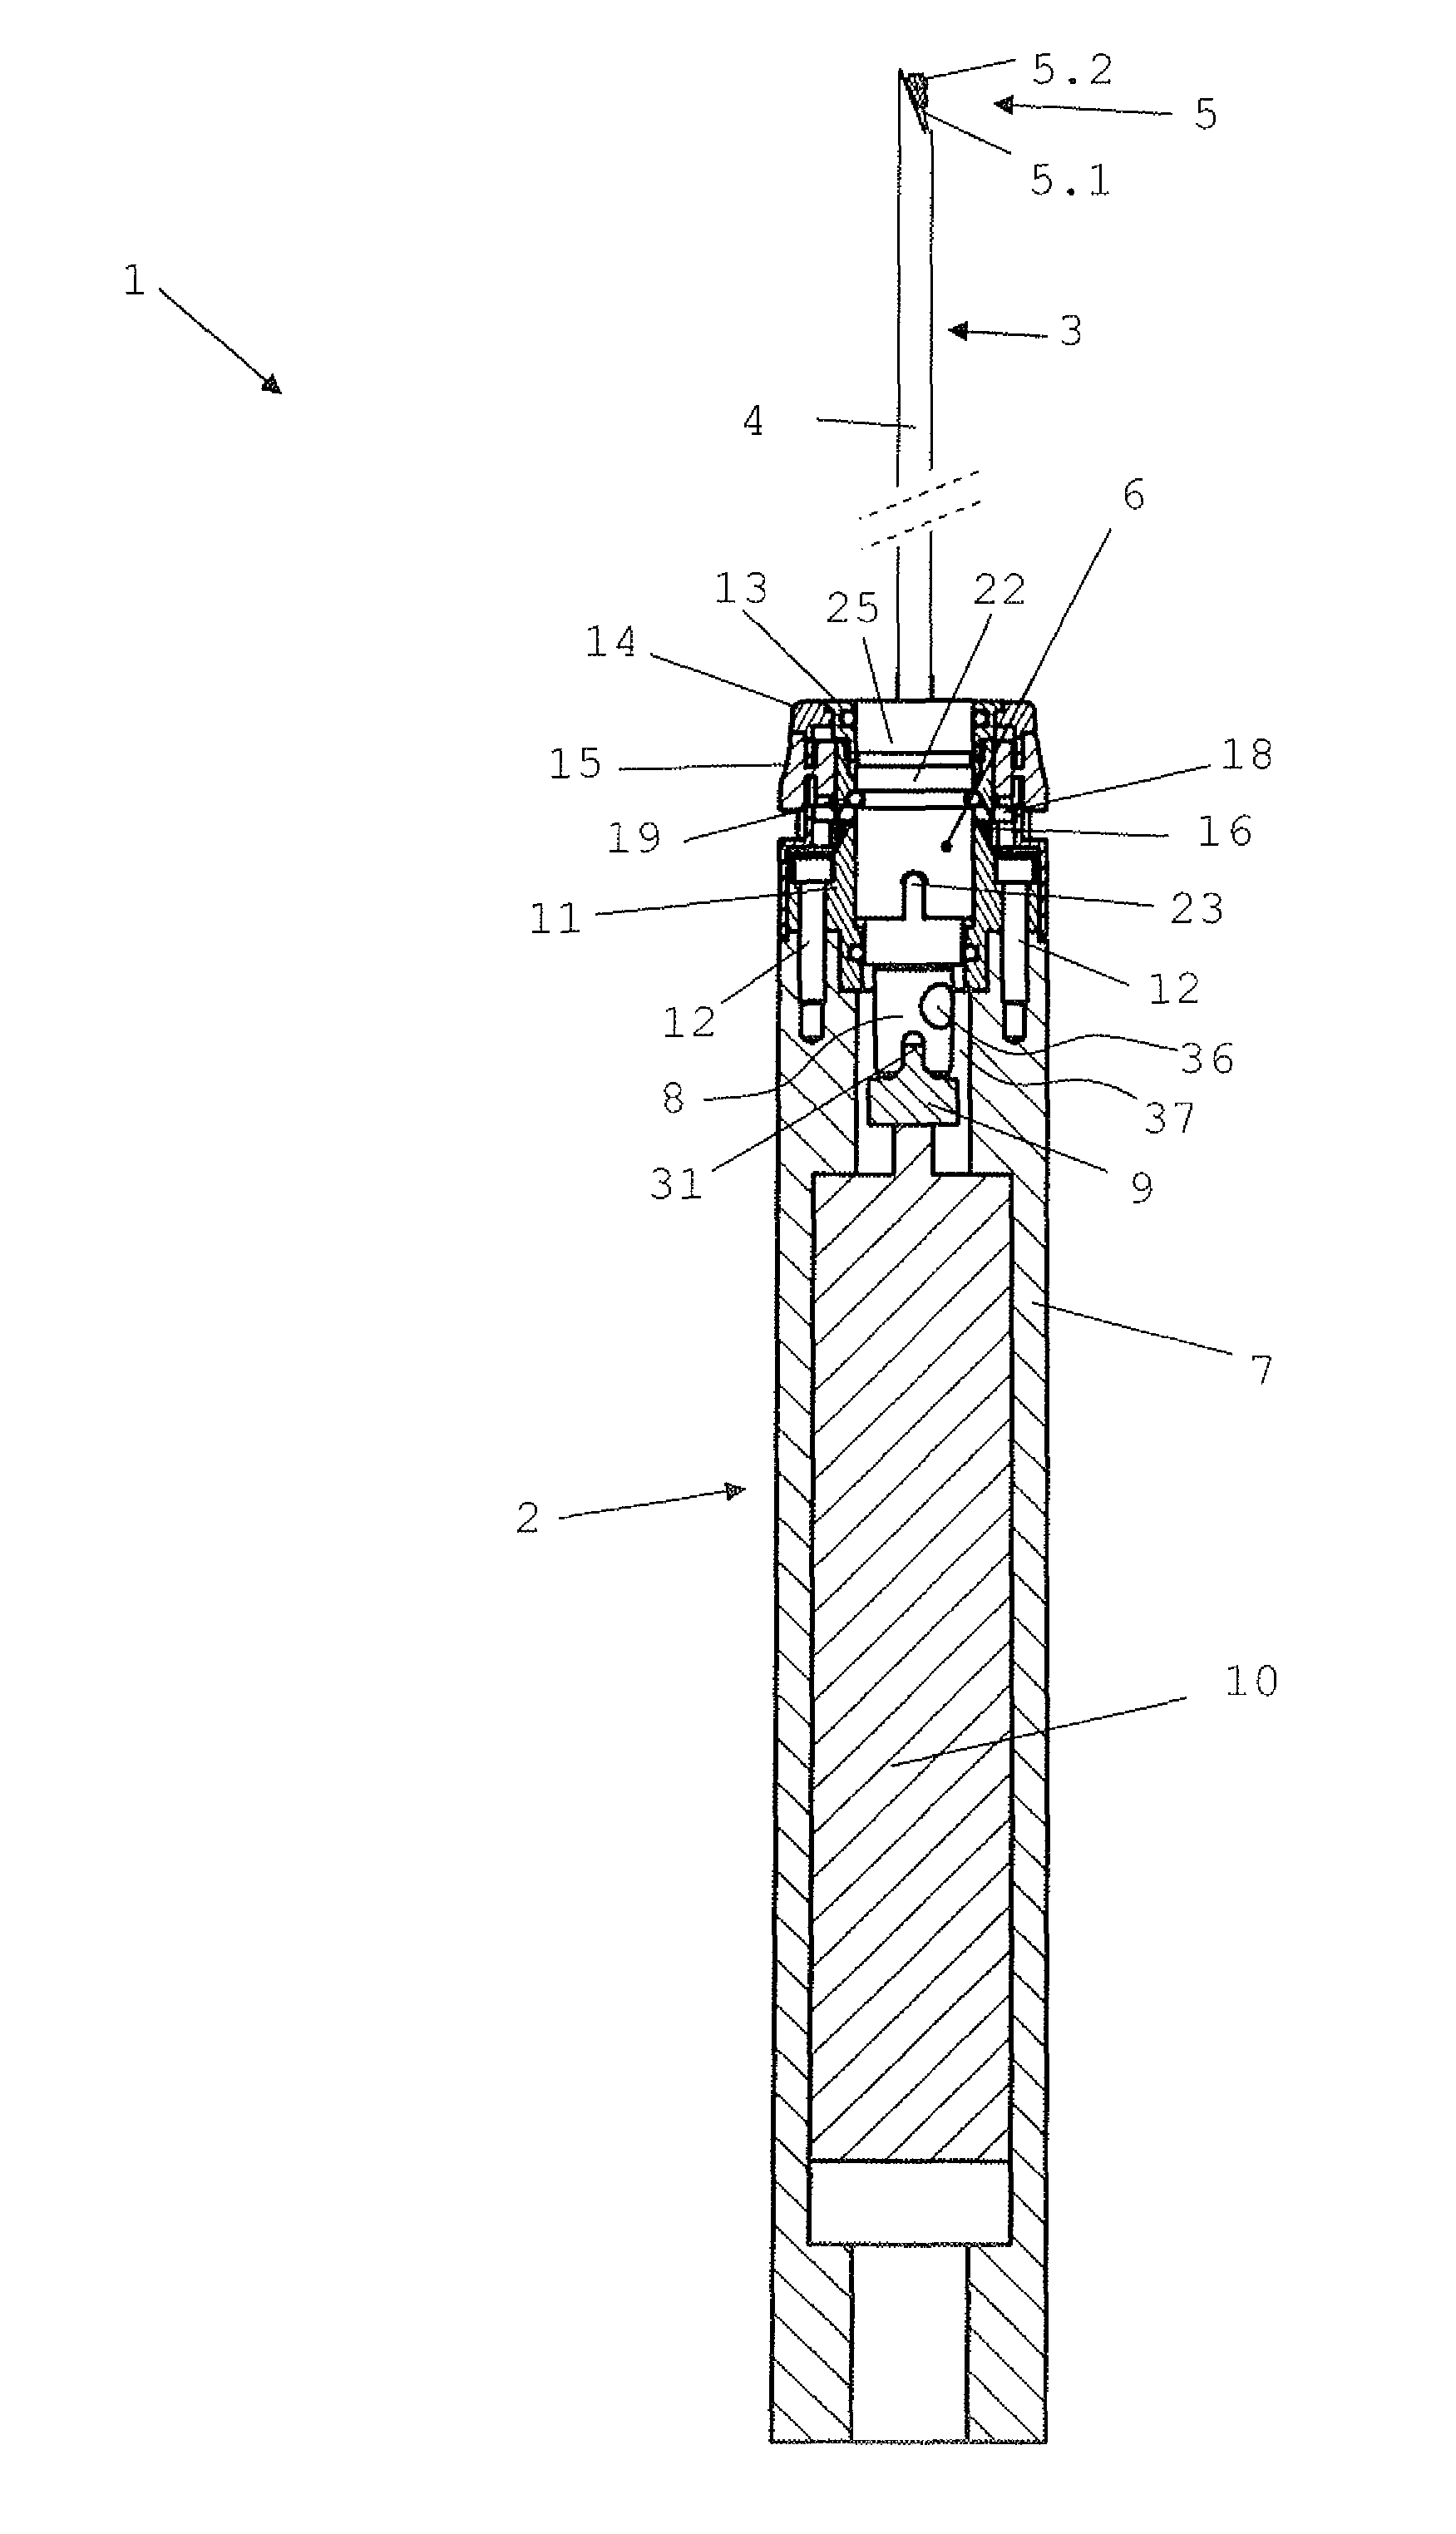 Surgical instrument for detachably connecting a handpiece to a surgical tool